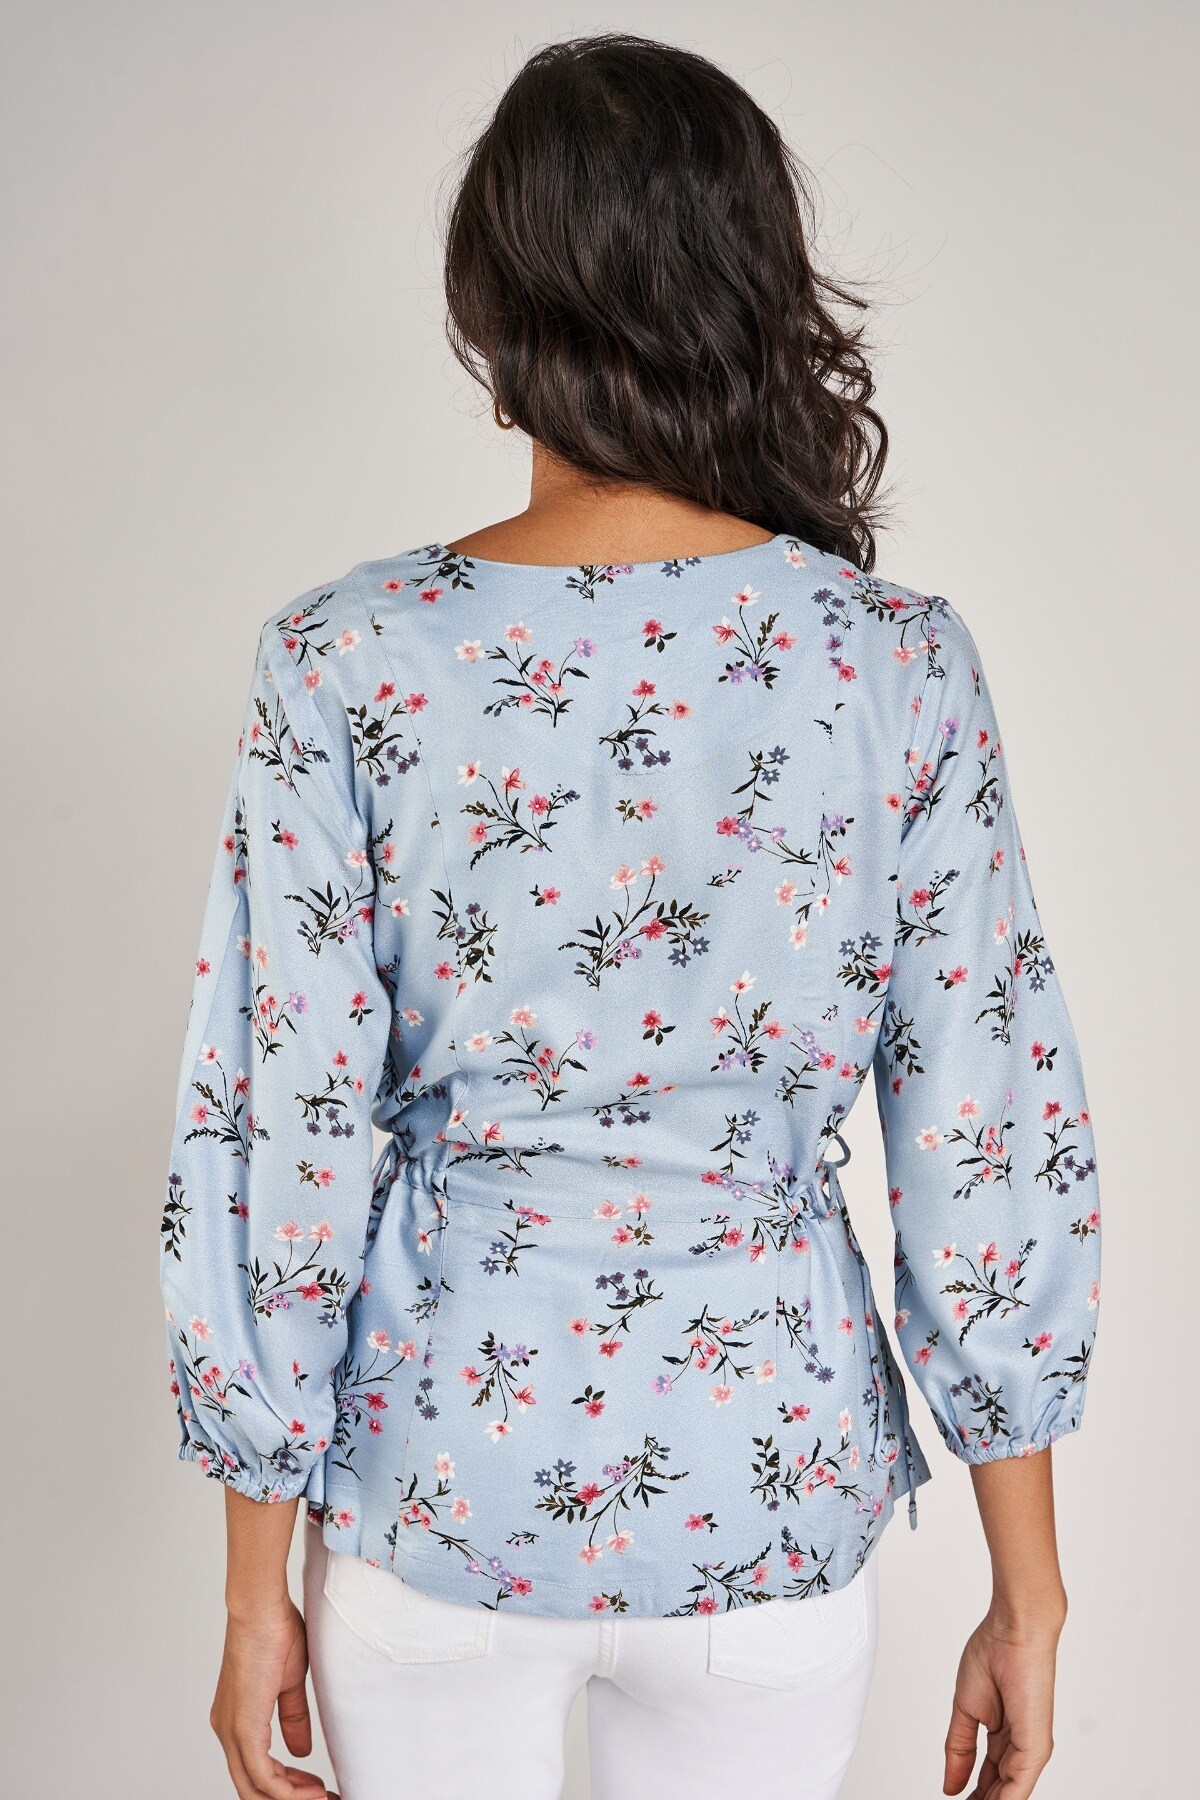 AND | Powder Blue Floral Printed Peplum Top 3